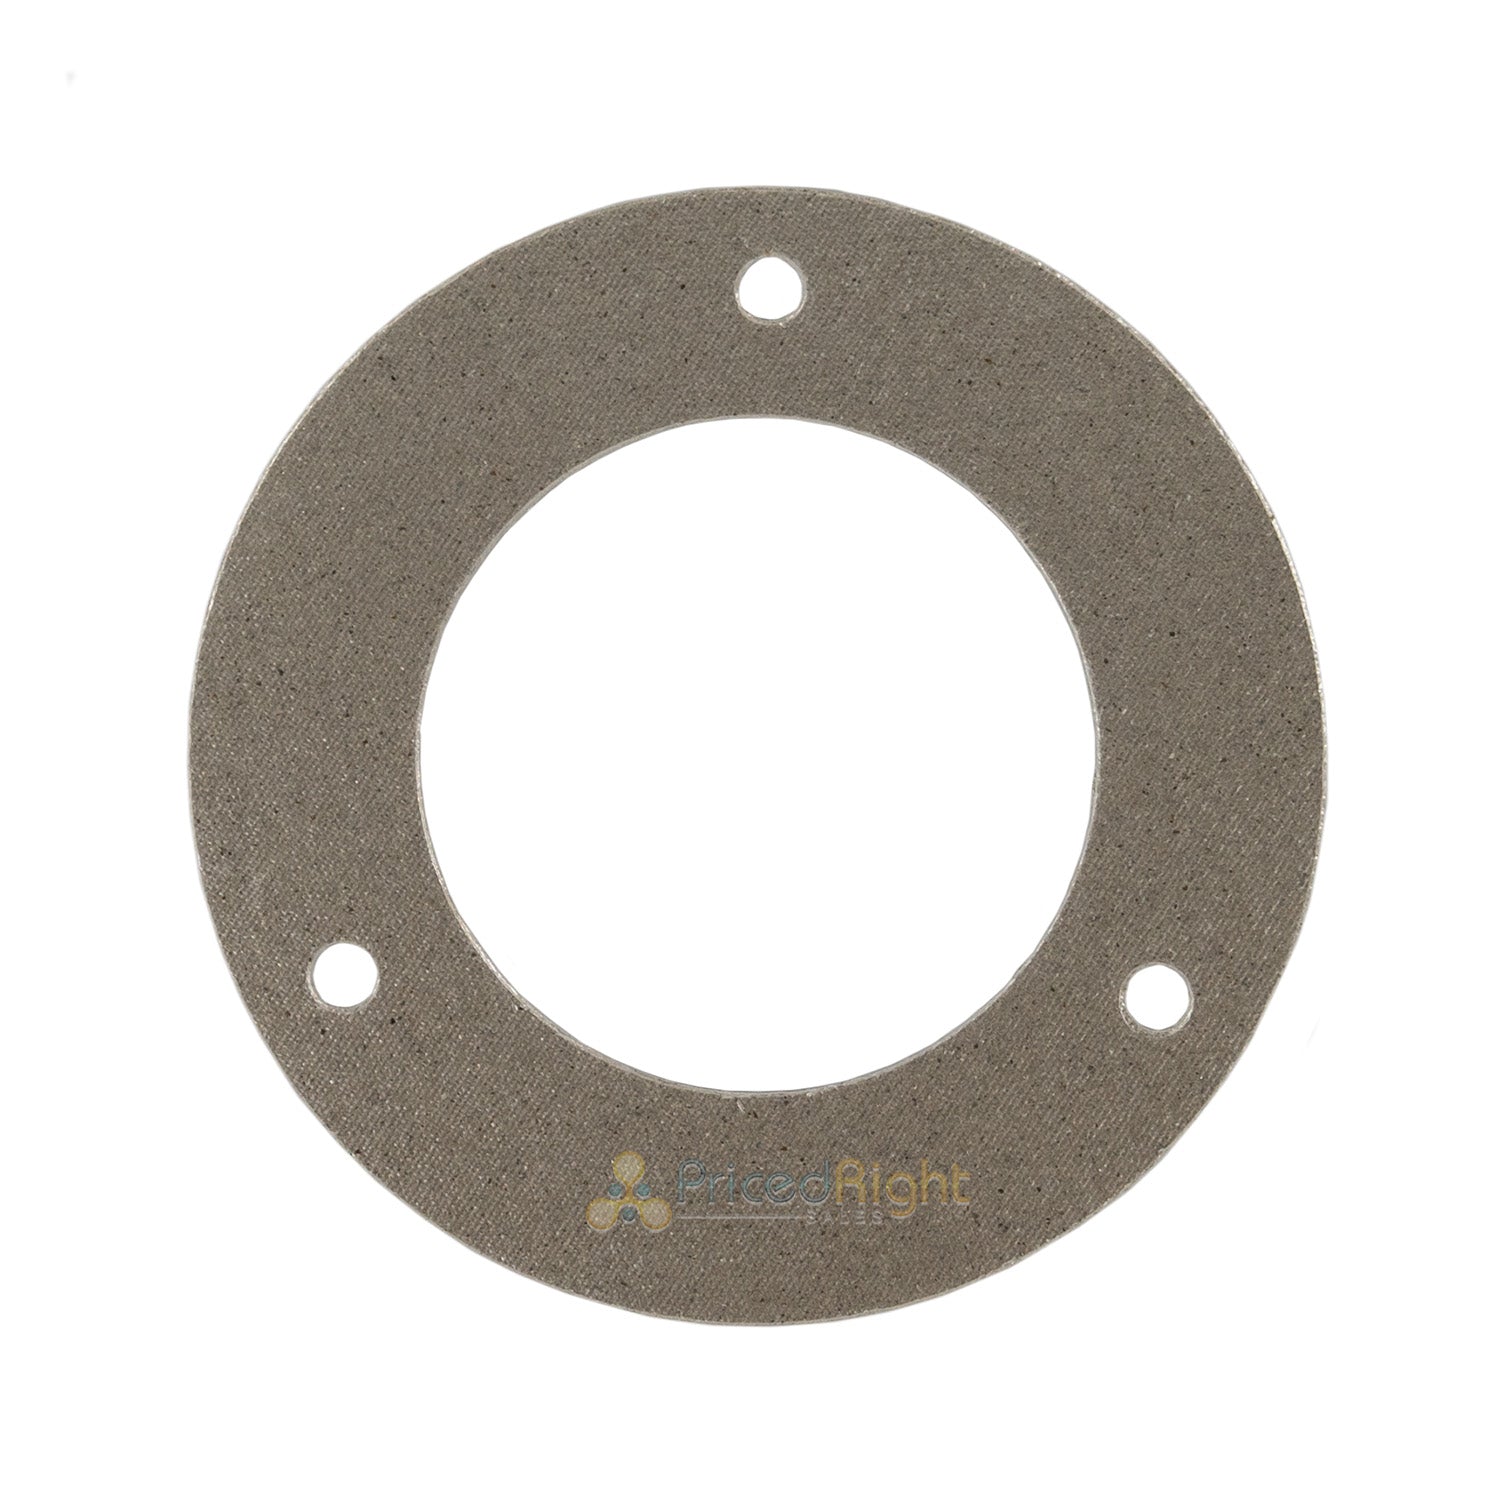 Green Mountain Grill Chimney Gasket Helps Prevent Air Leaks 5.5" OD GMGP-1046